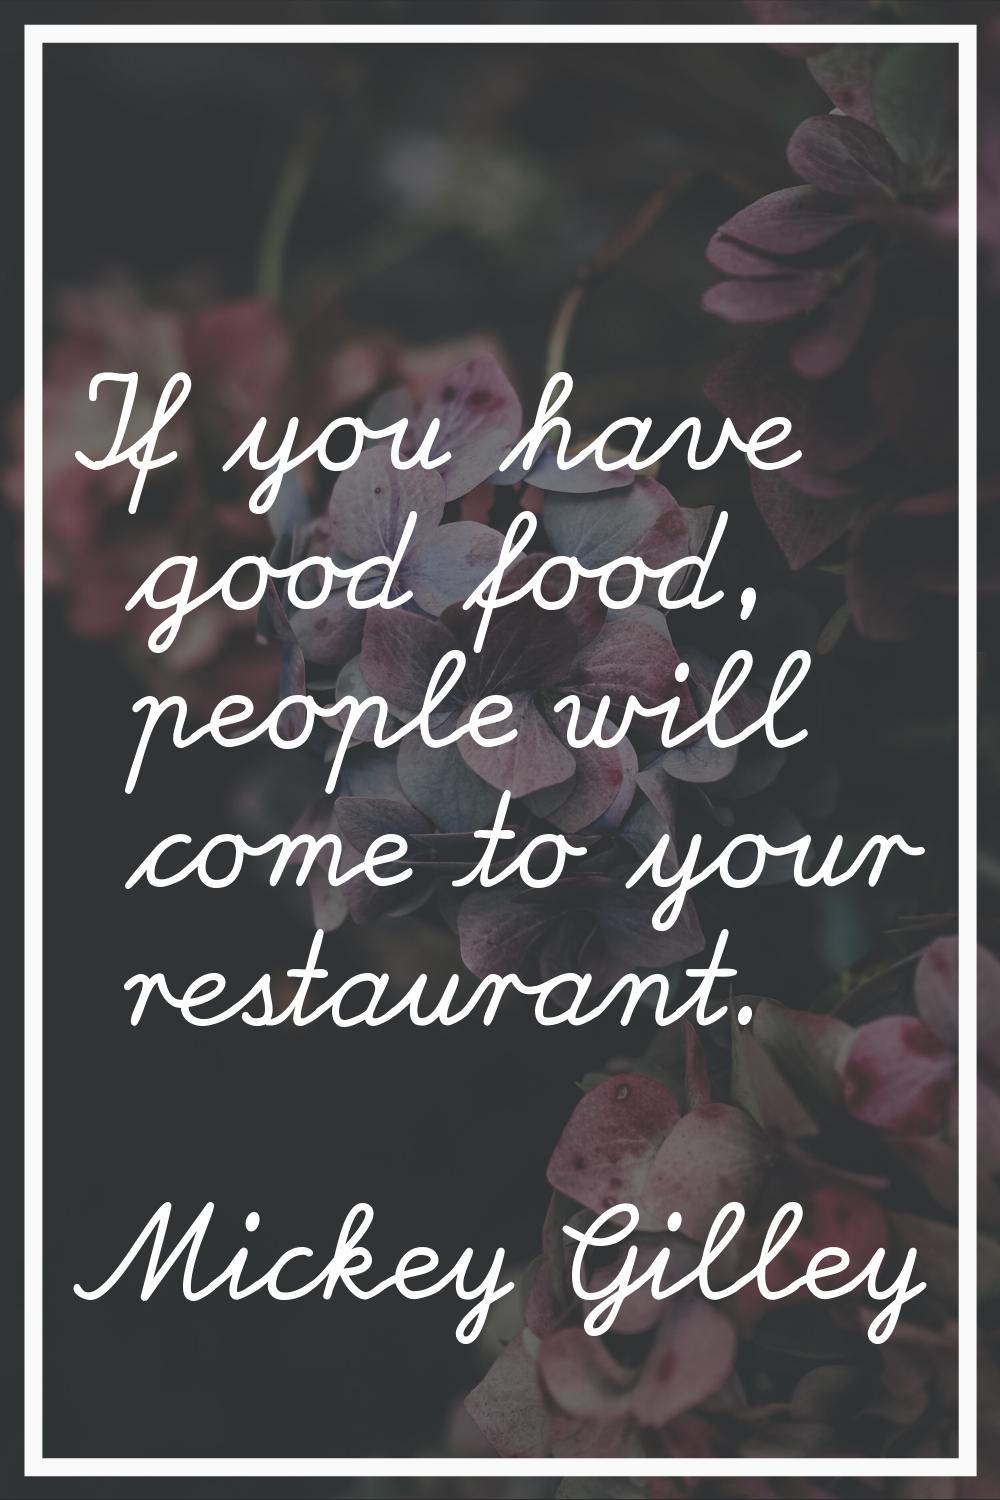 If you have good food, people will come to your restaurant.